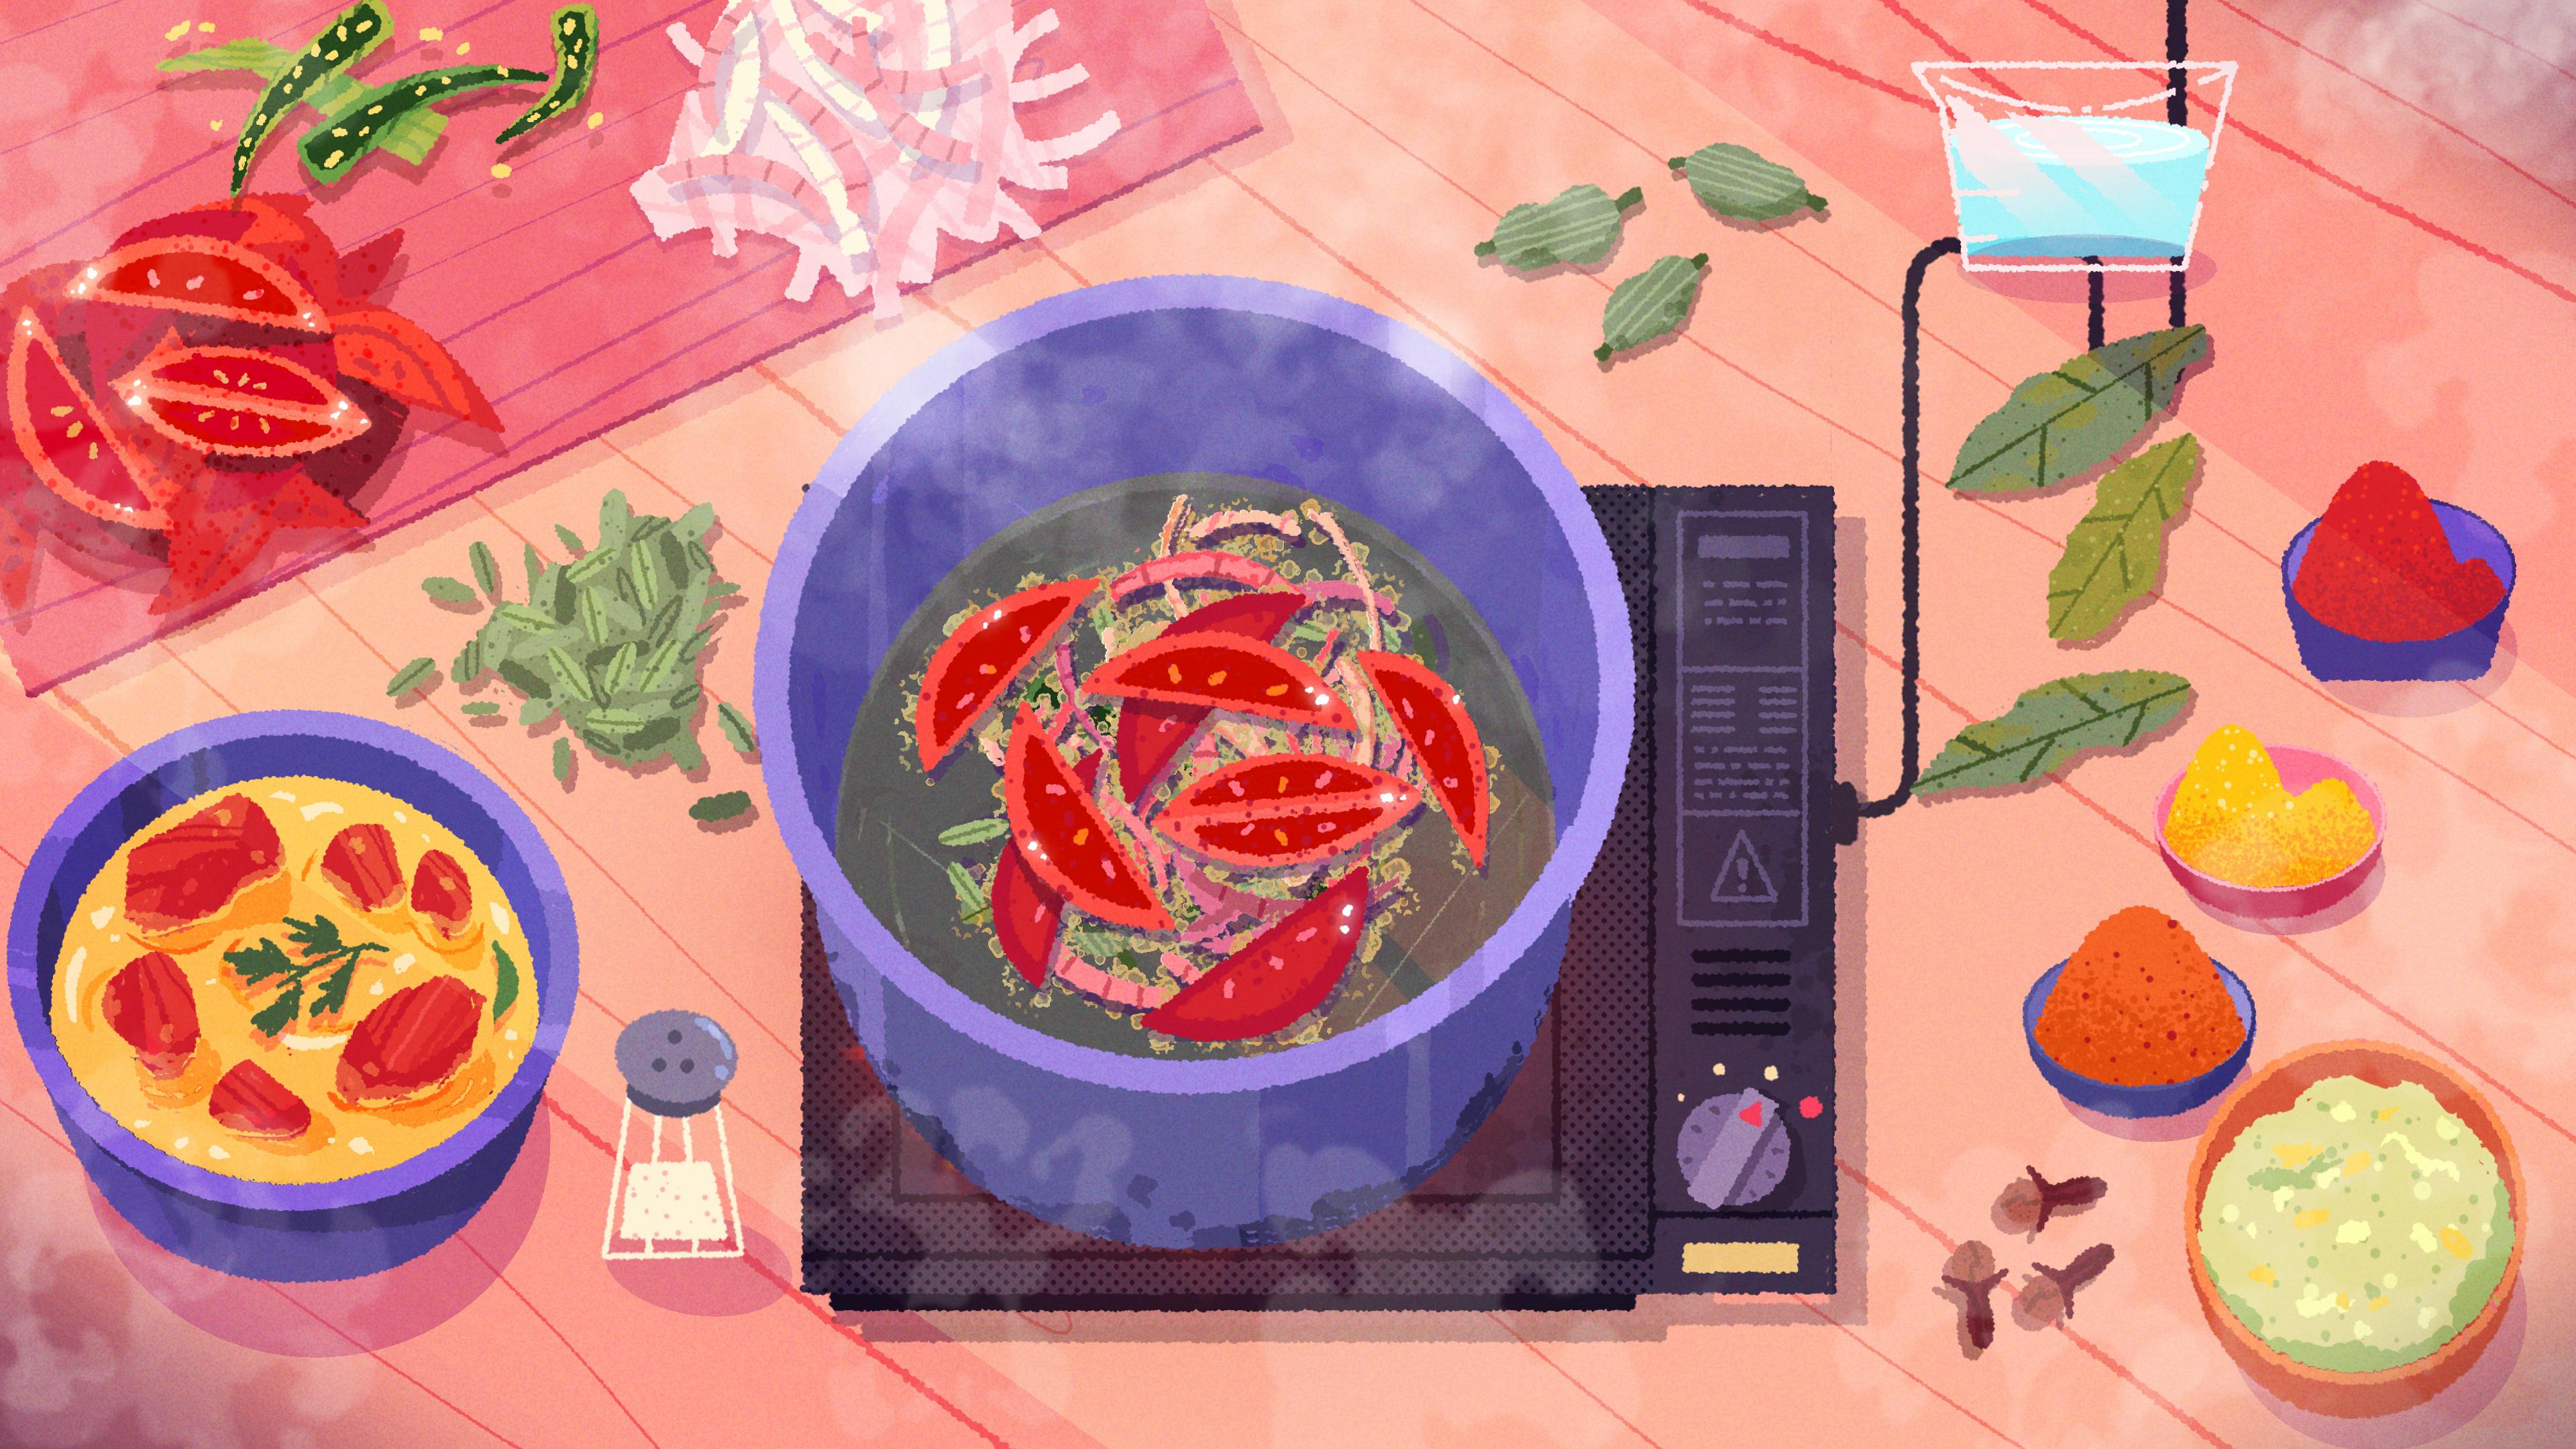 Cooking scene from bird's eye view. There's a pot of red peppers, water, and other ingredients on a hot plate. Surrounding is is other ingredients such as onion, peppers, pastes, herbs, and leaves.